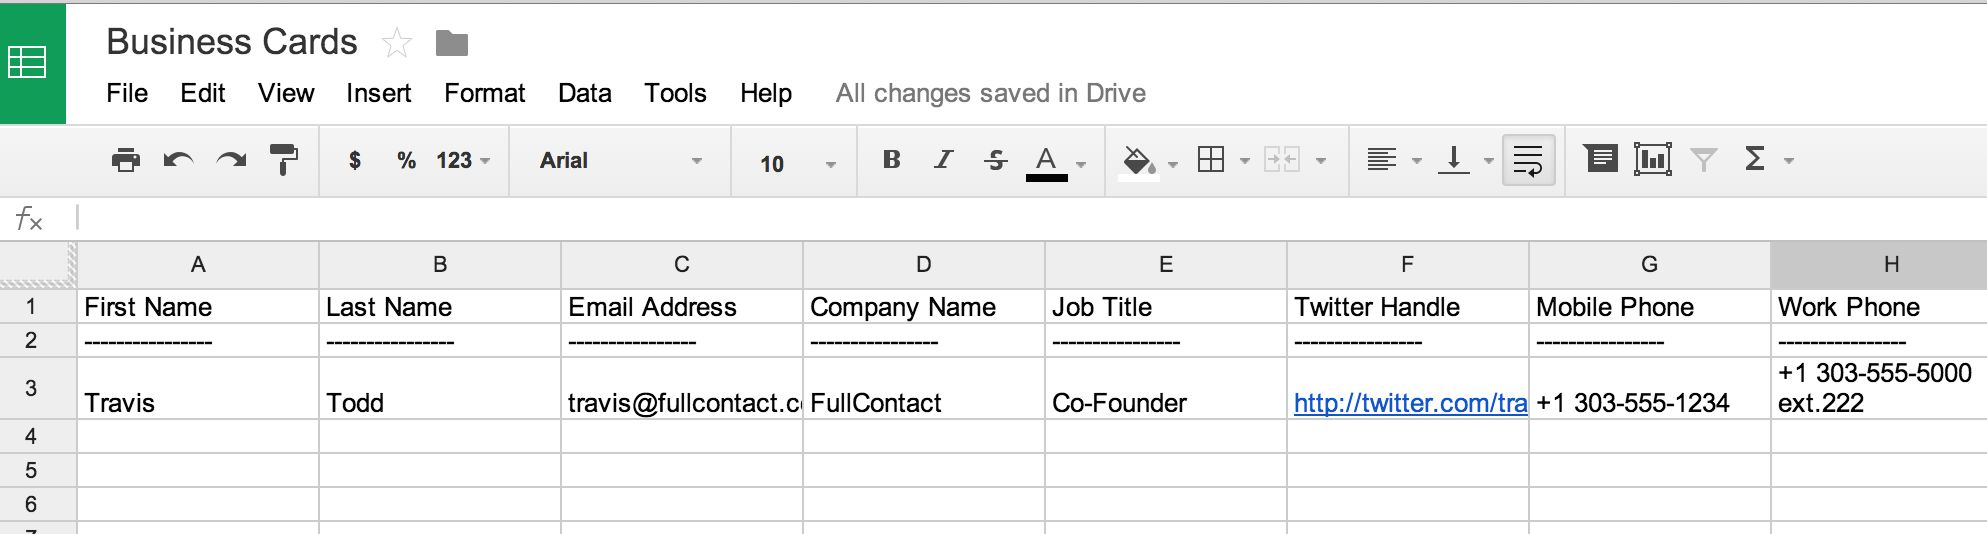 How To Set Up Spreadsheet For Business Throughout How To Scan Business Cards Into A Spreadsheet